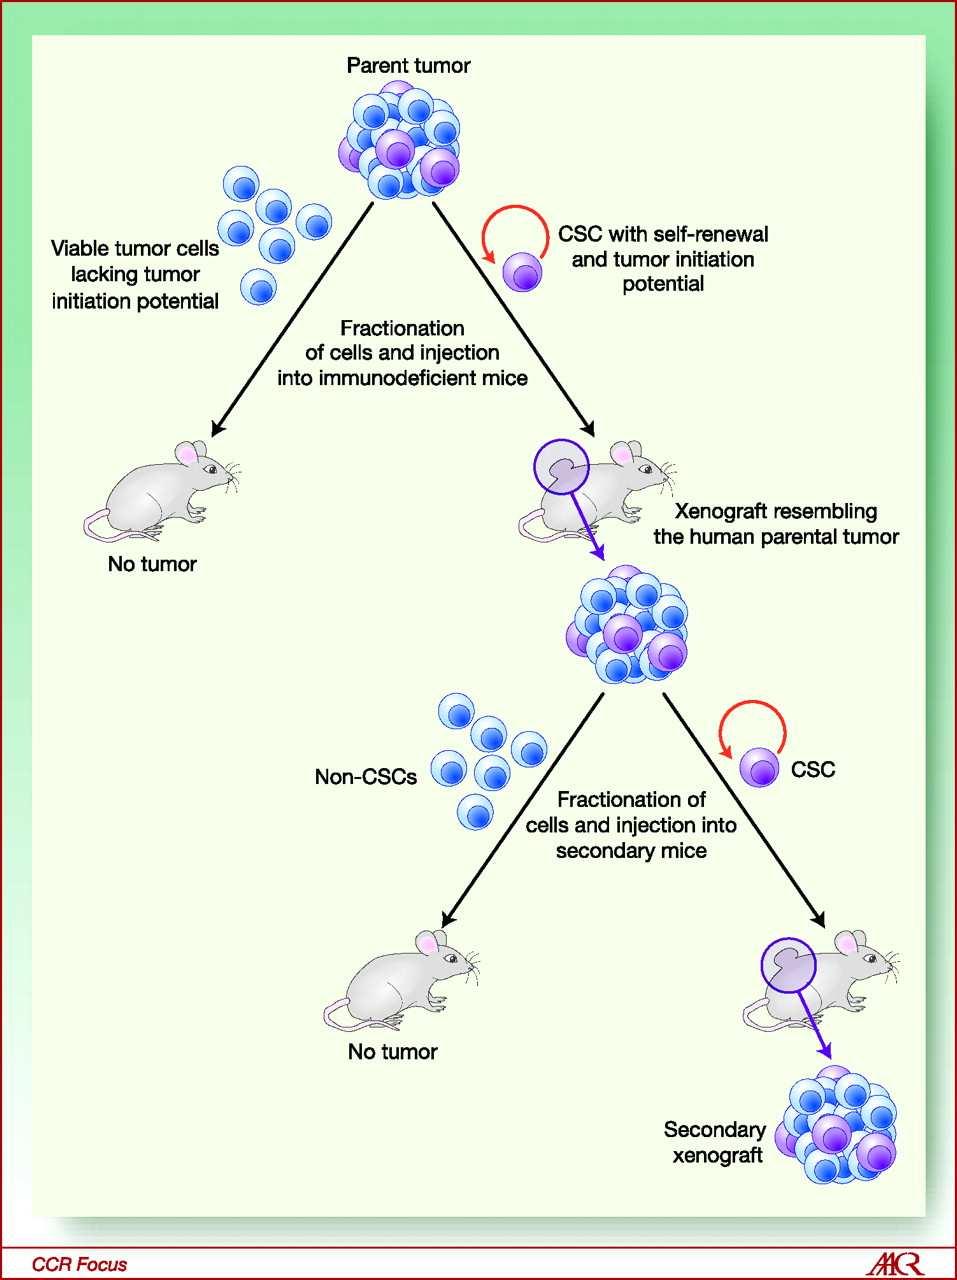 Features of human CSCs as assayed in immunodeficient